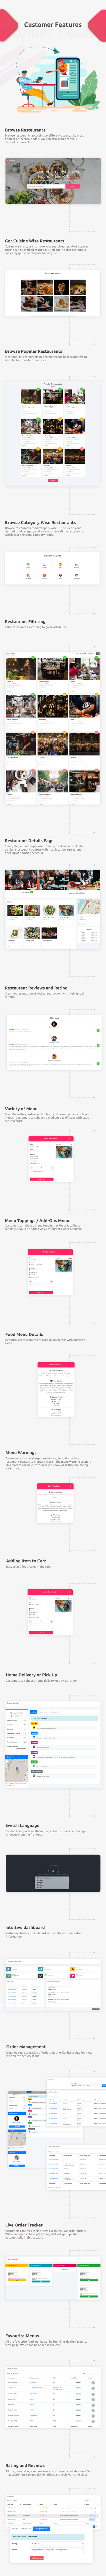 FoodMob - An Online Multi Restaurant Food Ordering and Management with Delivery System - Customer features